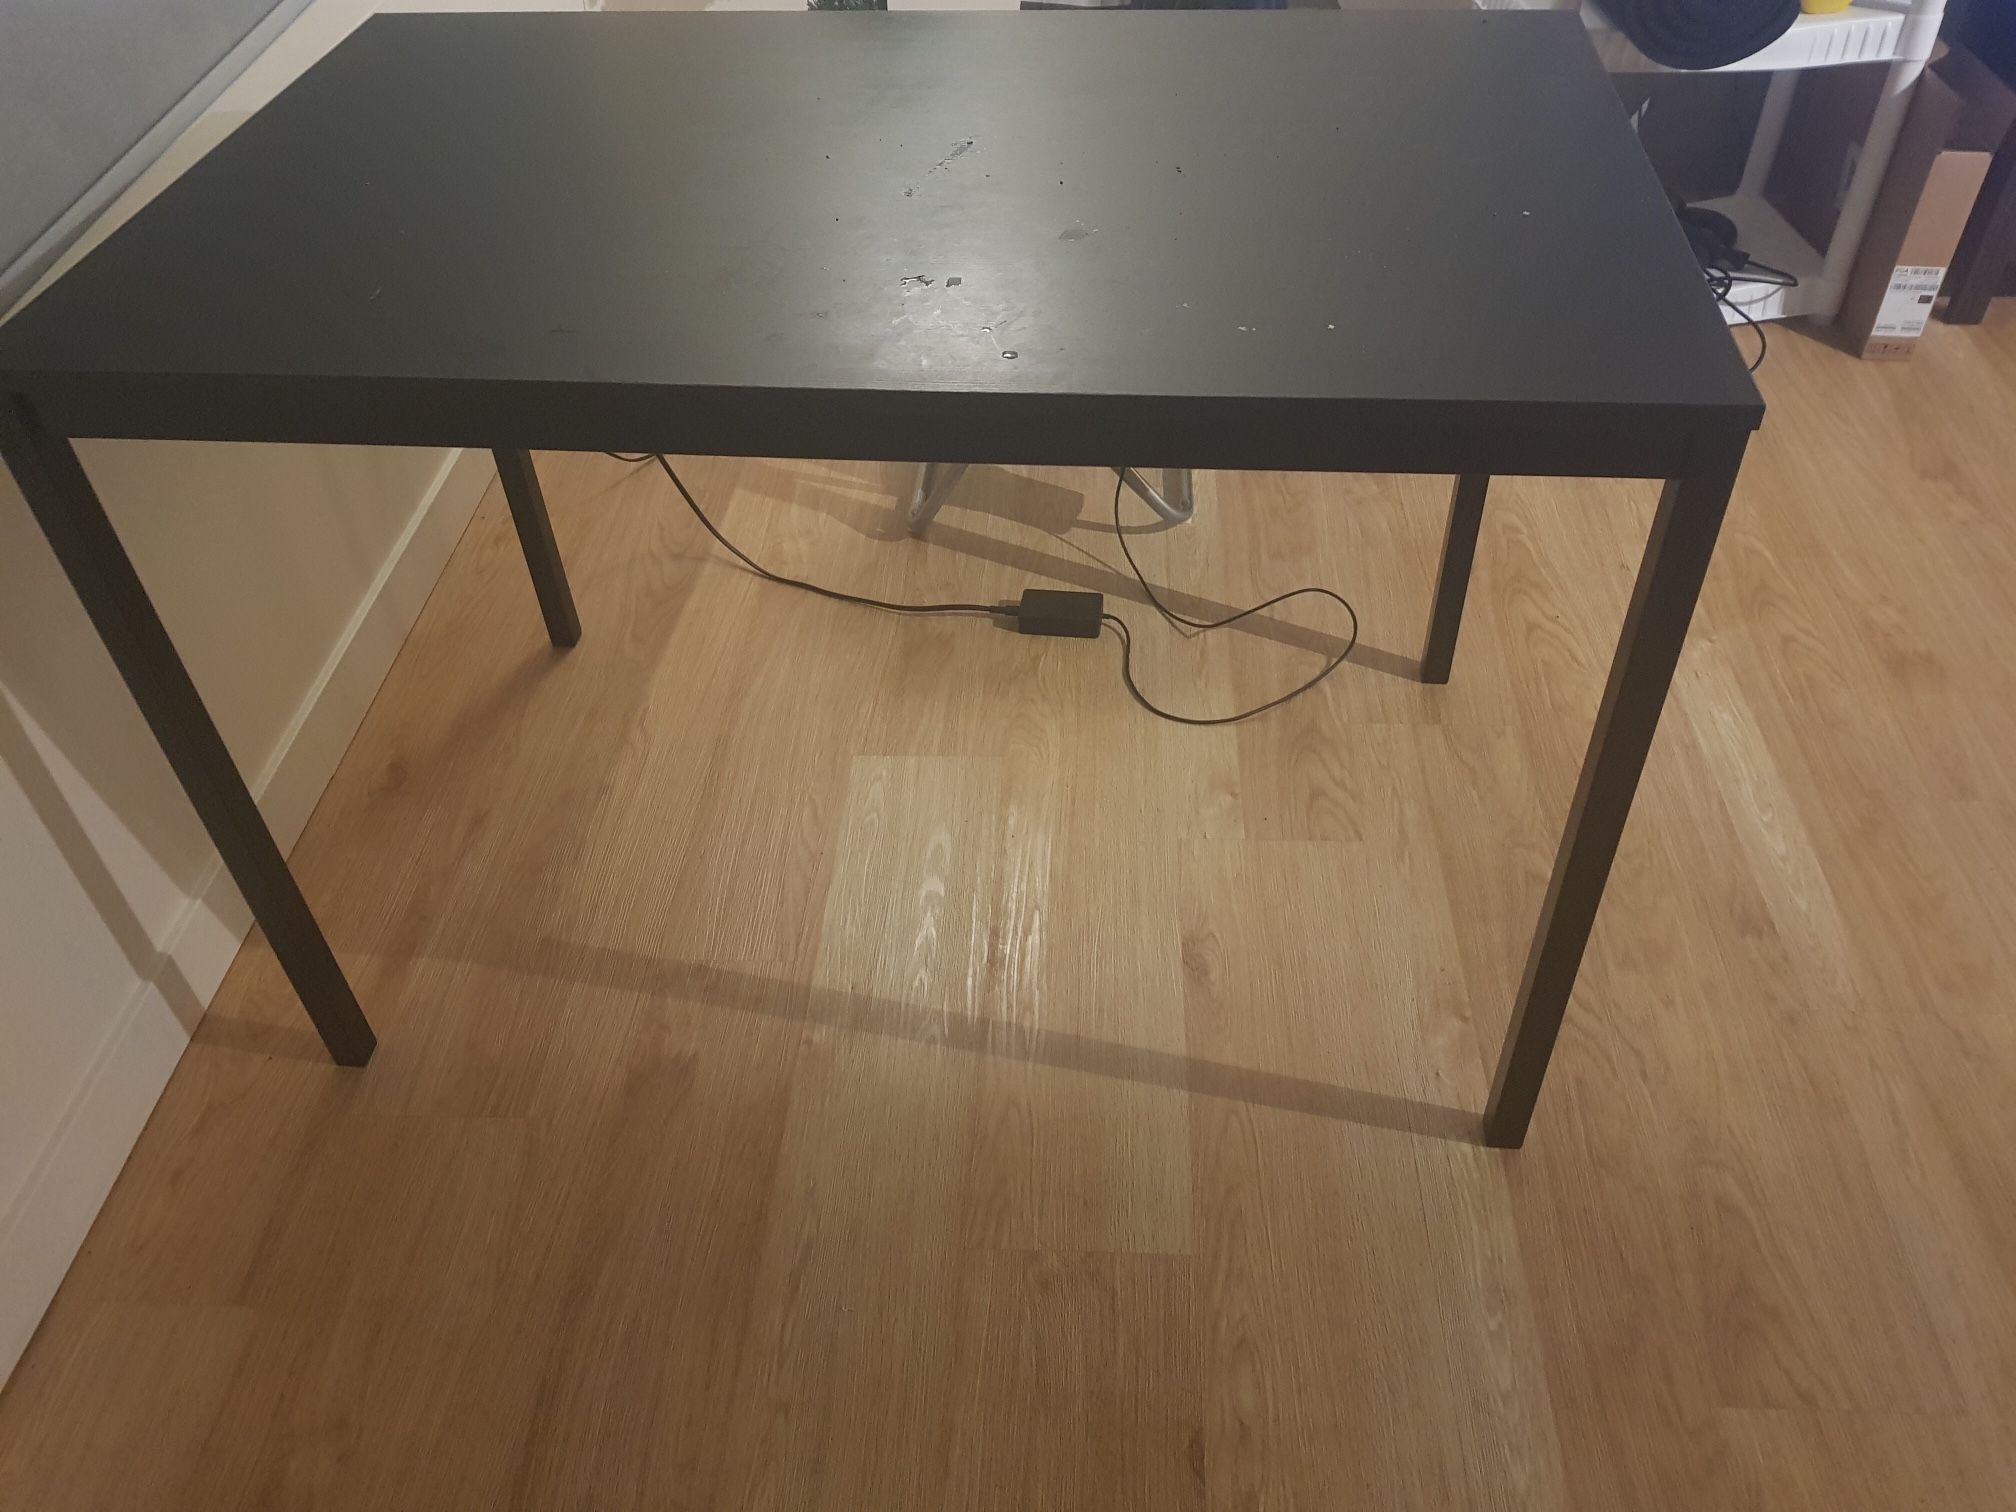 46 1/2 X 29 1/8 Inches LEHRAMN IKEA Dining Table